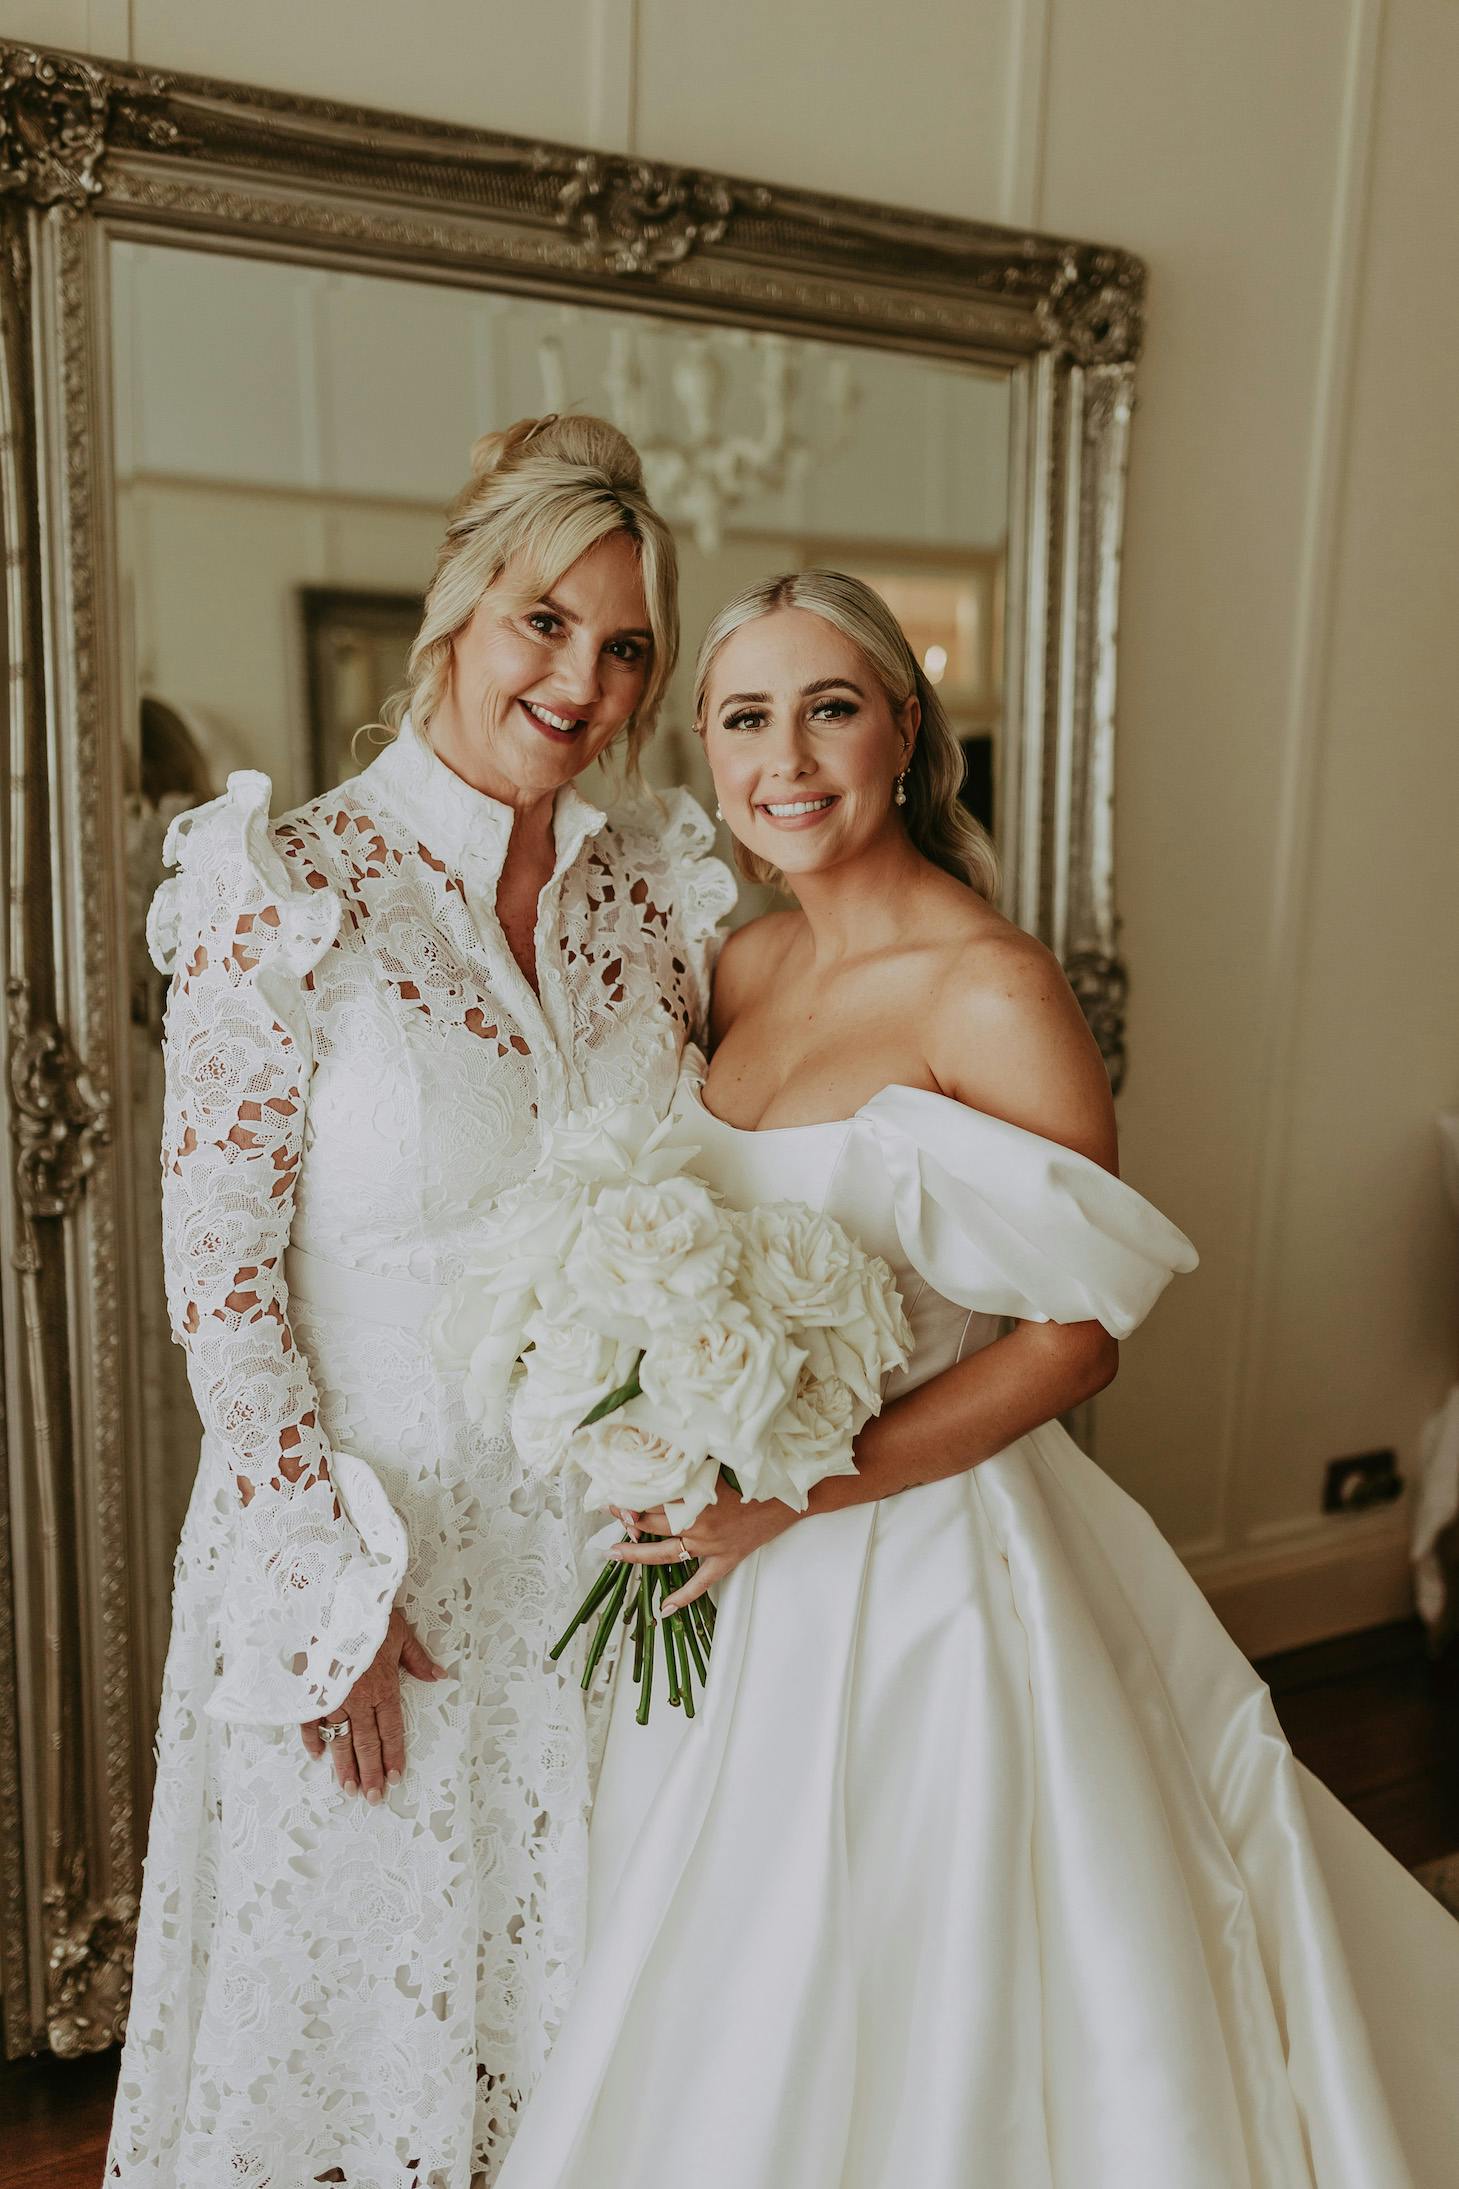 A bride and an older woman smile together in front of an ornate mirror, dressed in white. The bride wears an off-the-shoulder gown and holds a bouquet of white roses. The older woman is in a lace dress with ruffled sleeves. Both are standing in an elegant room.